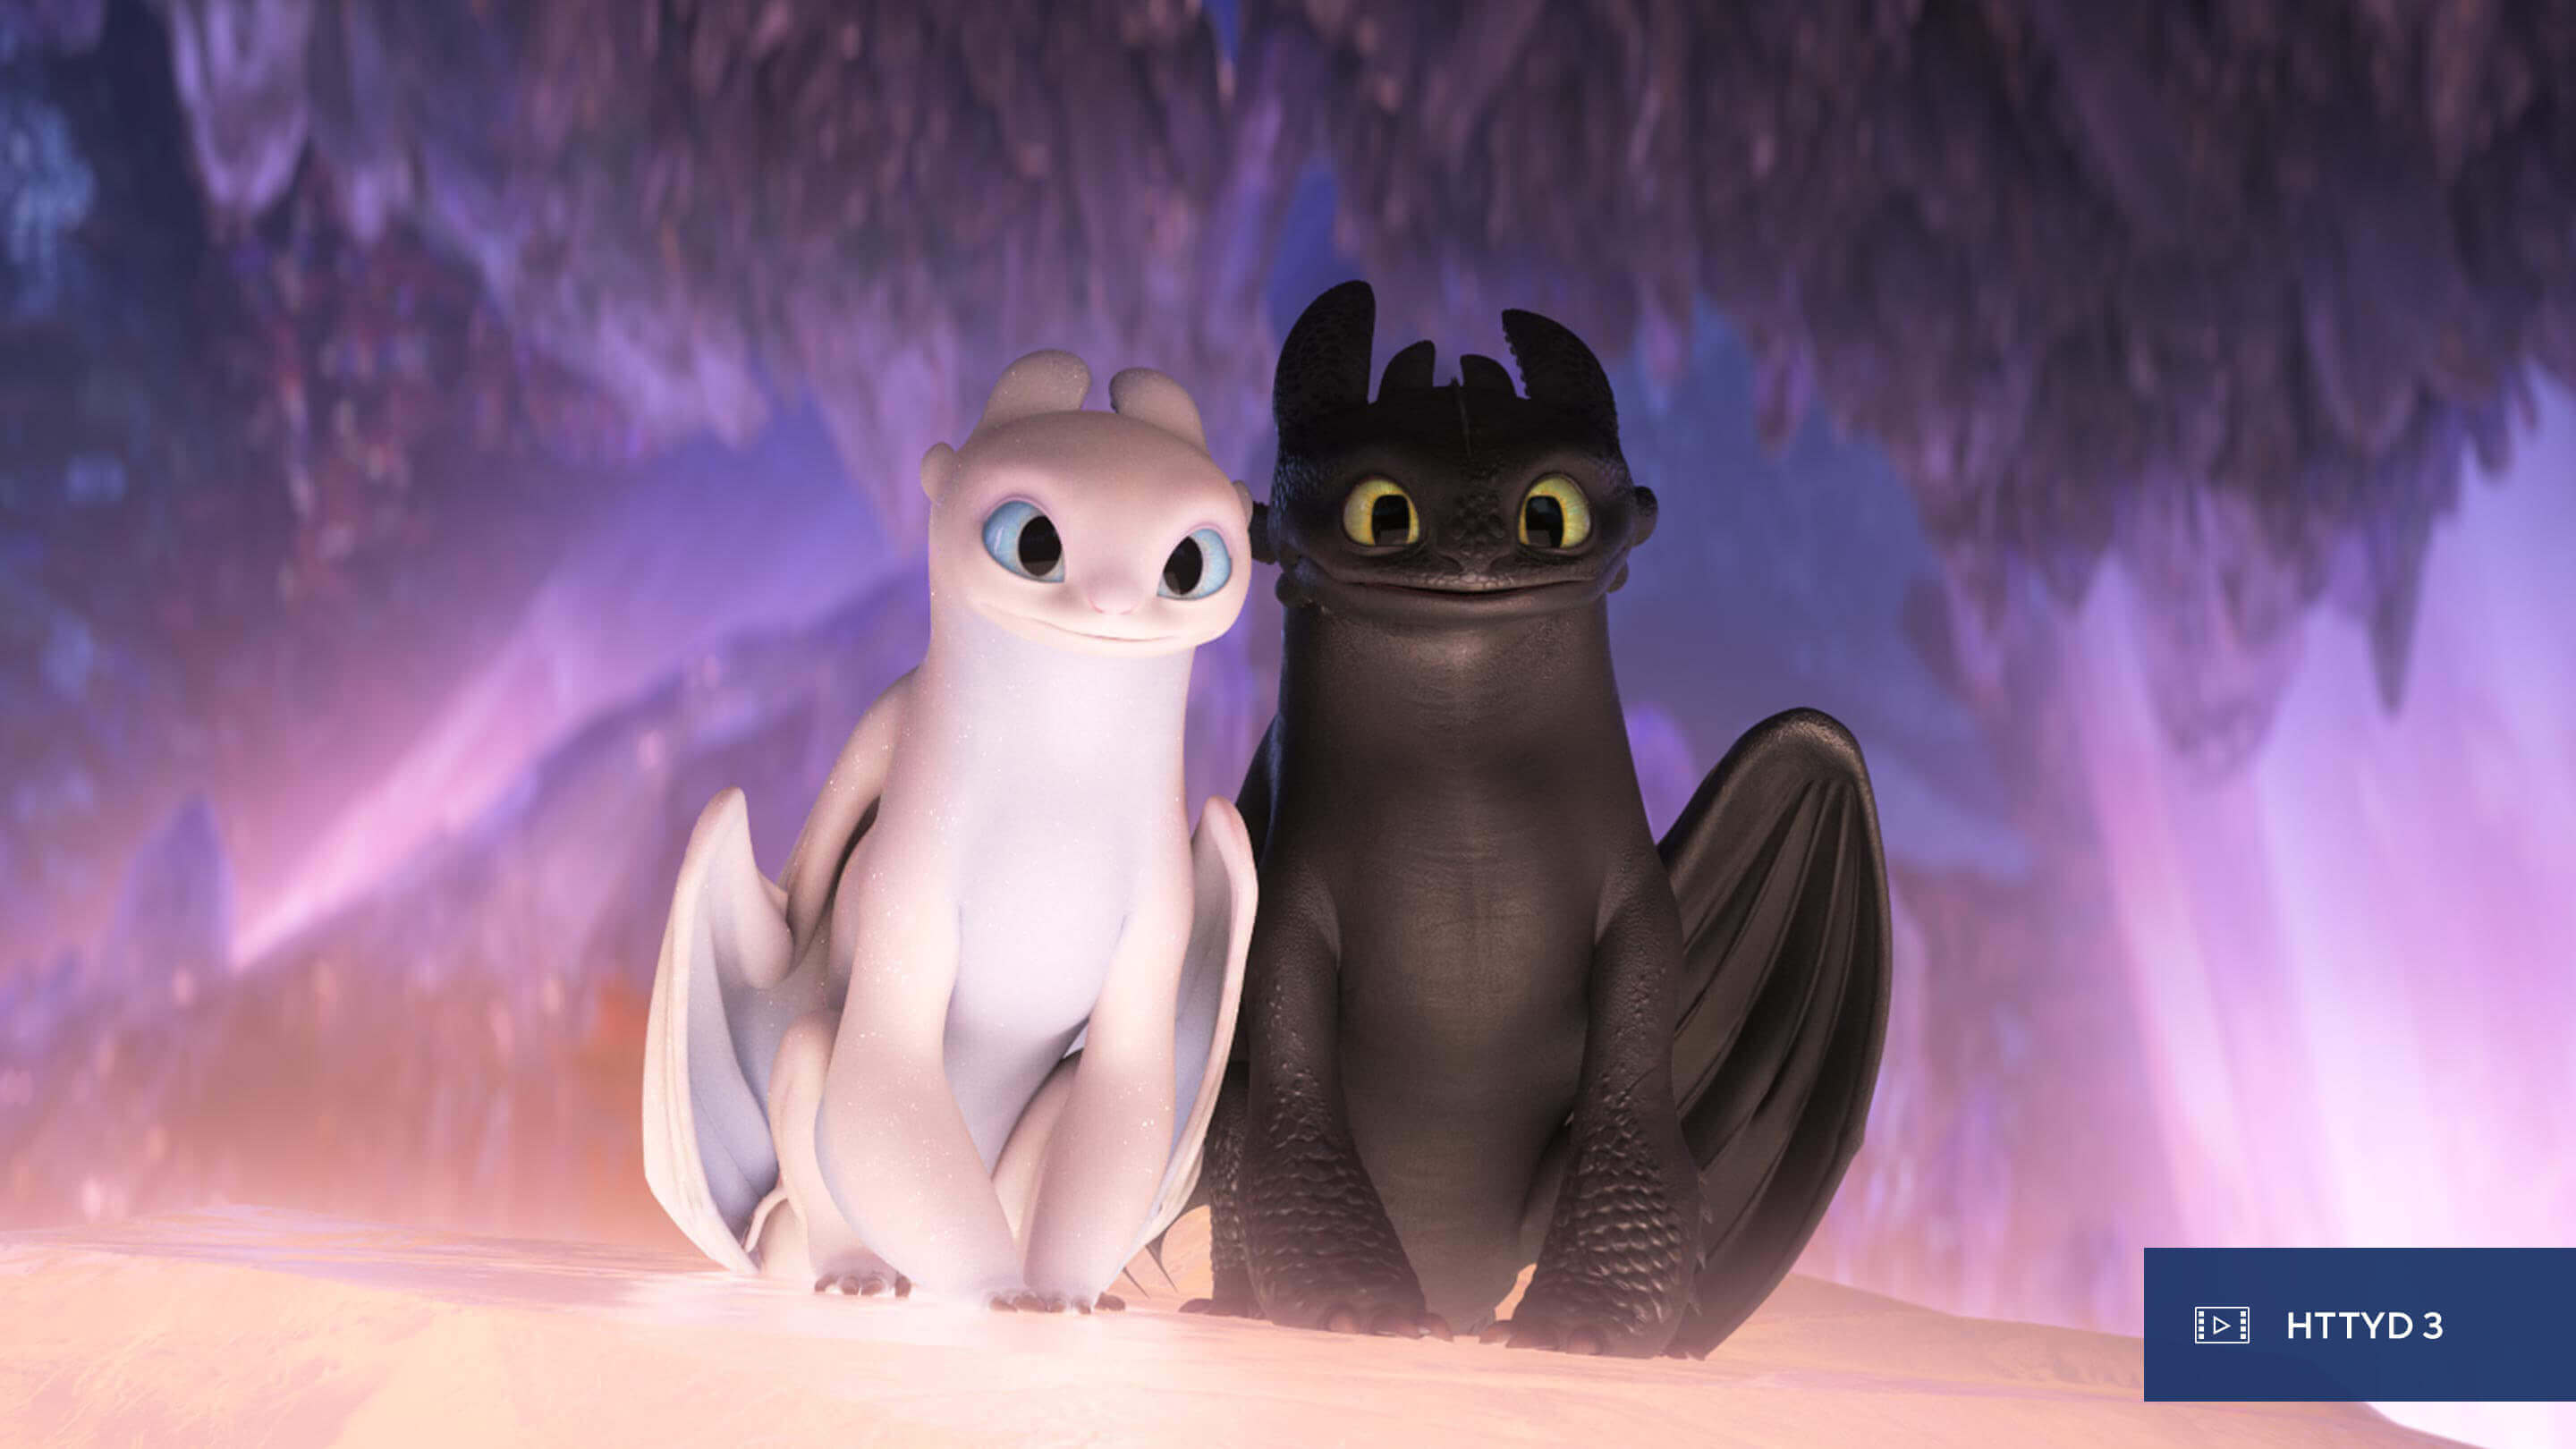 Toothless and his Son! Rise of Berk App